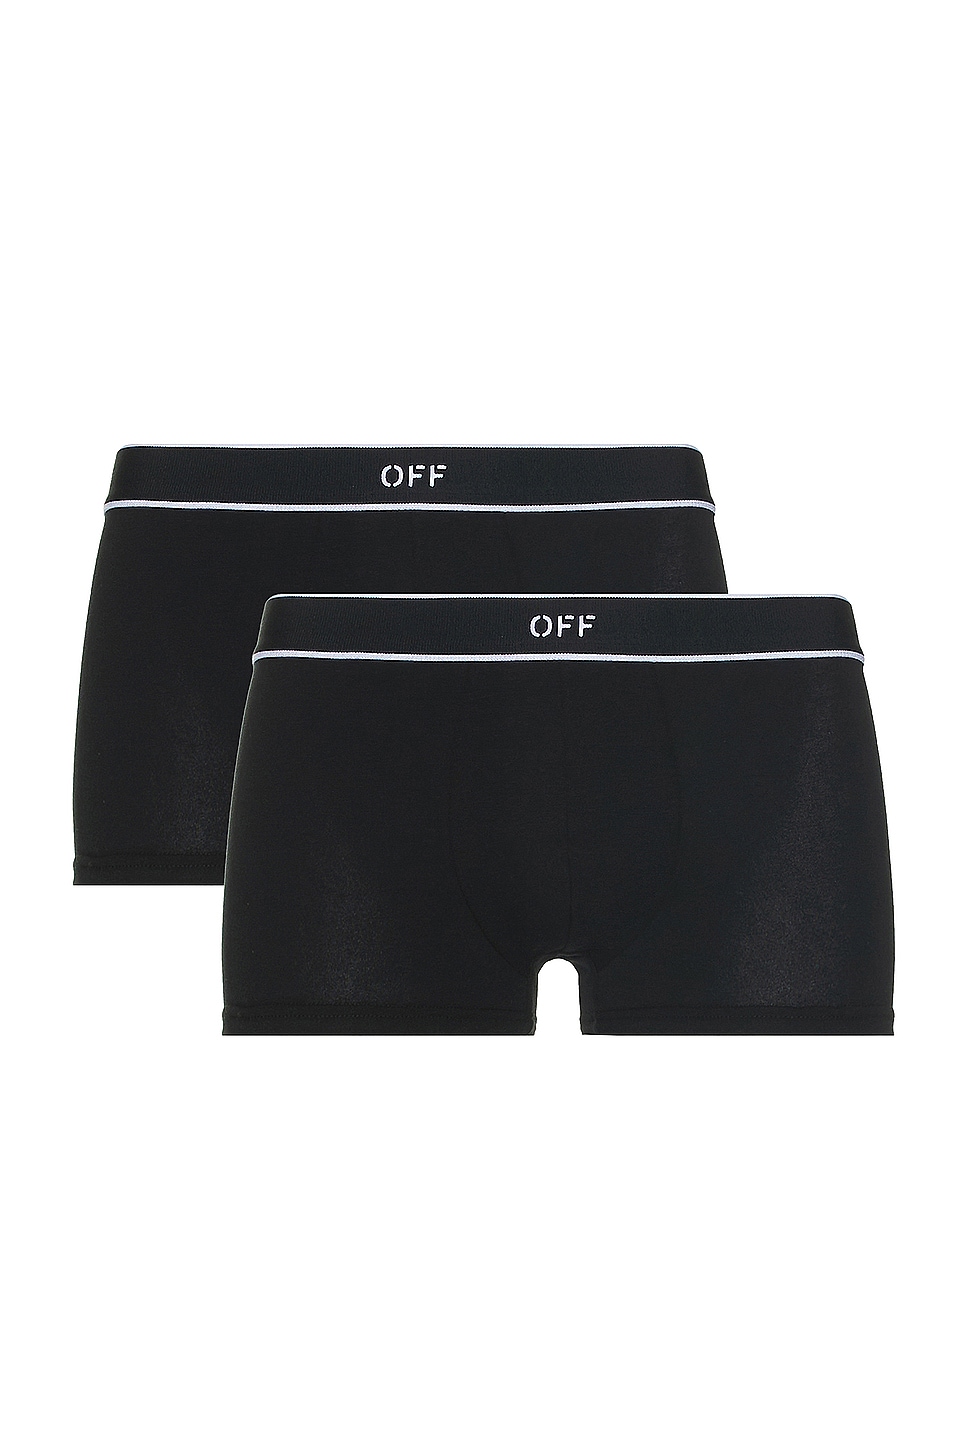 Image 1 of OFF-WHITE Stamp Low Rise Boxer in Black & White